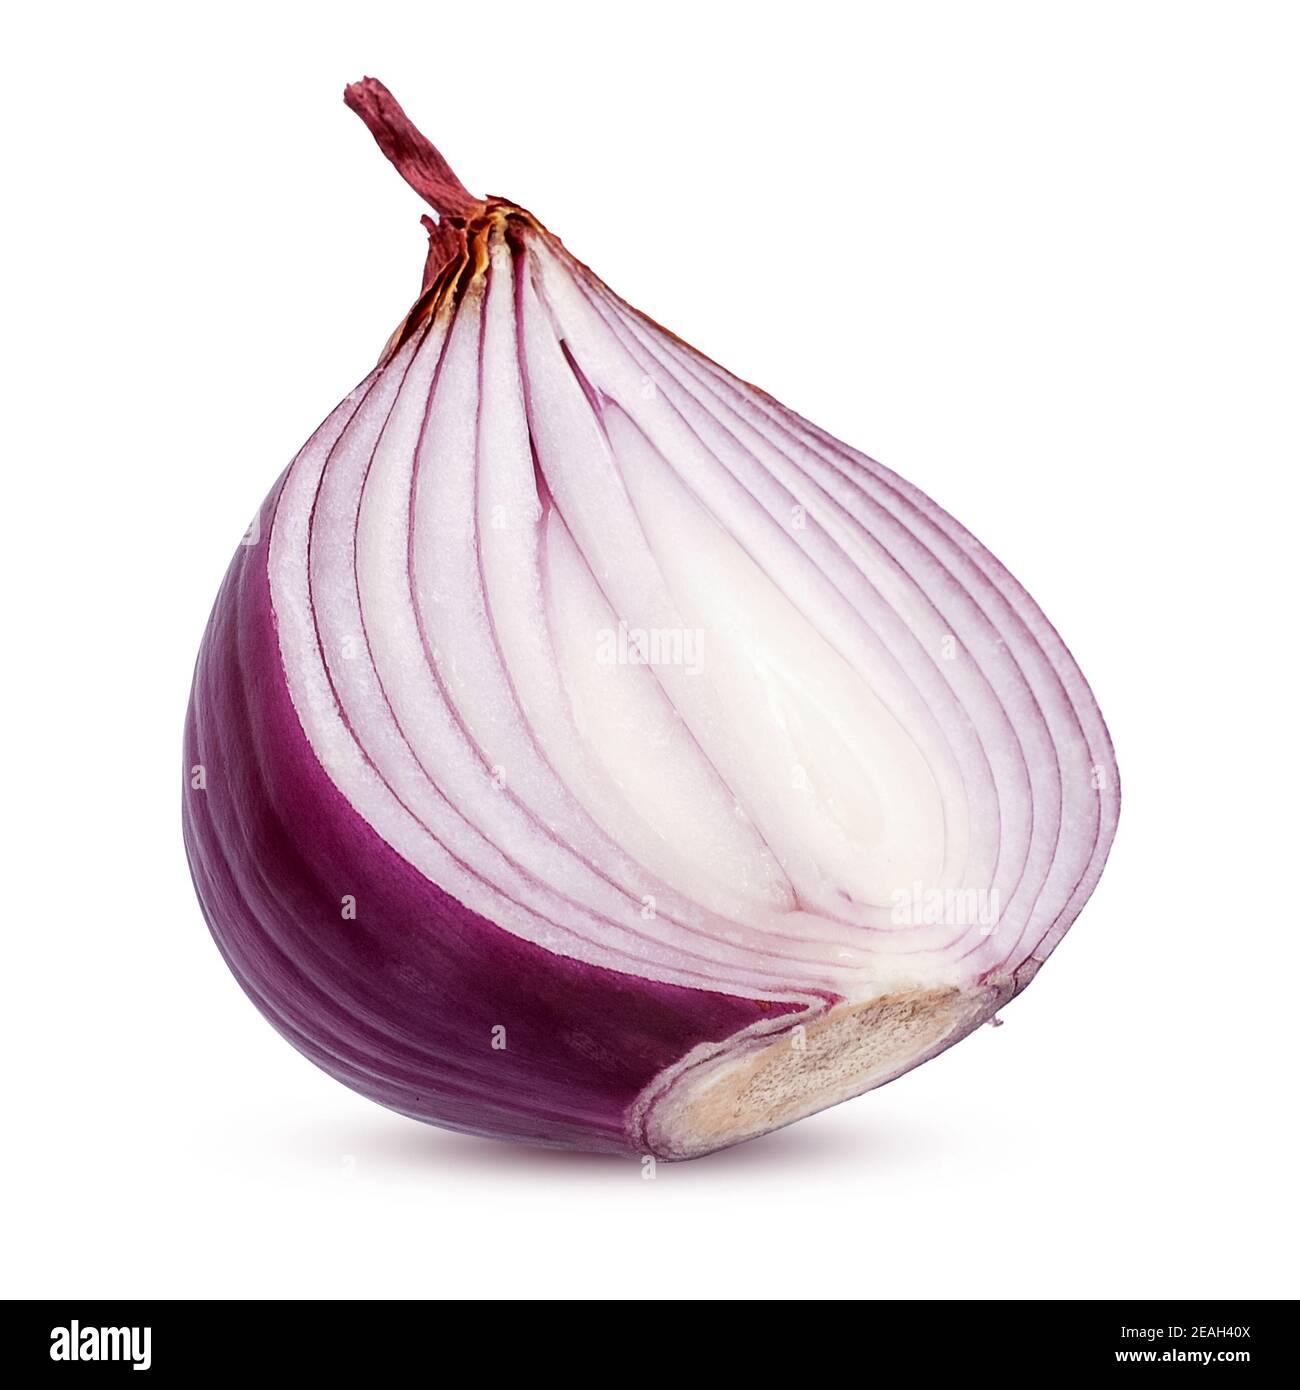 Red onion vegetable isolated on white background Stock Photo